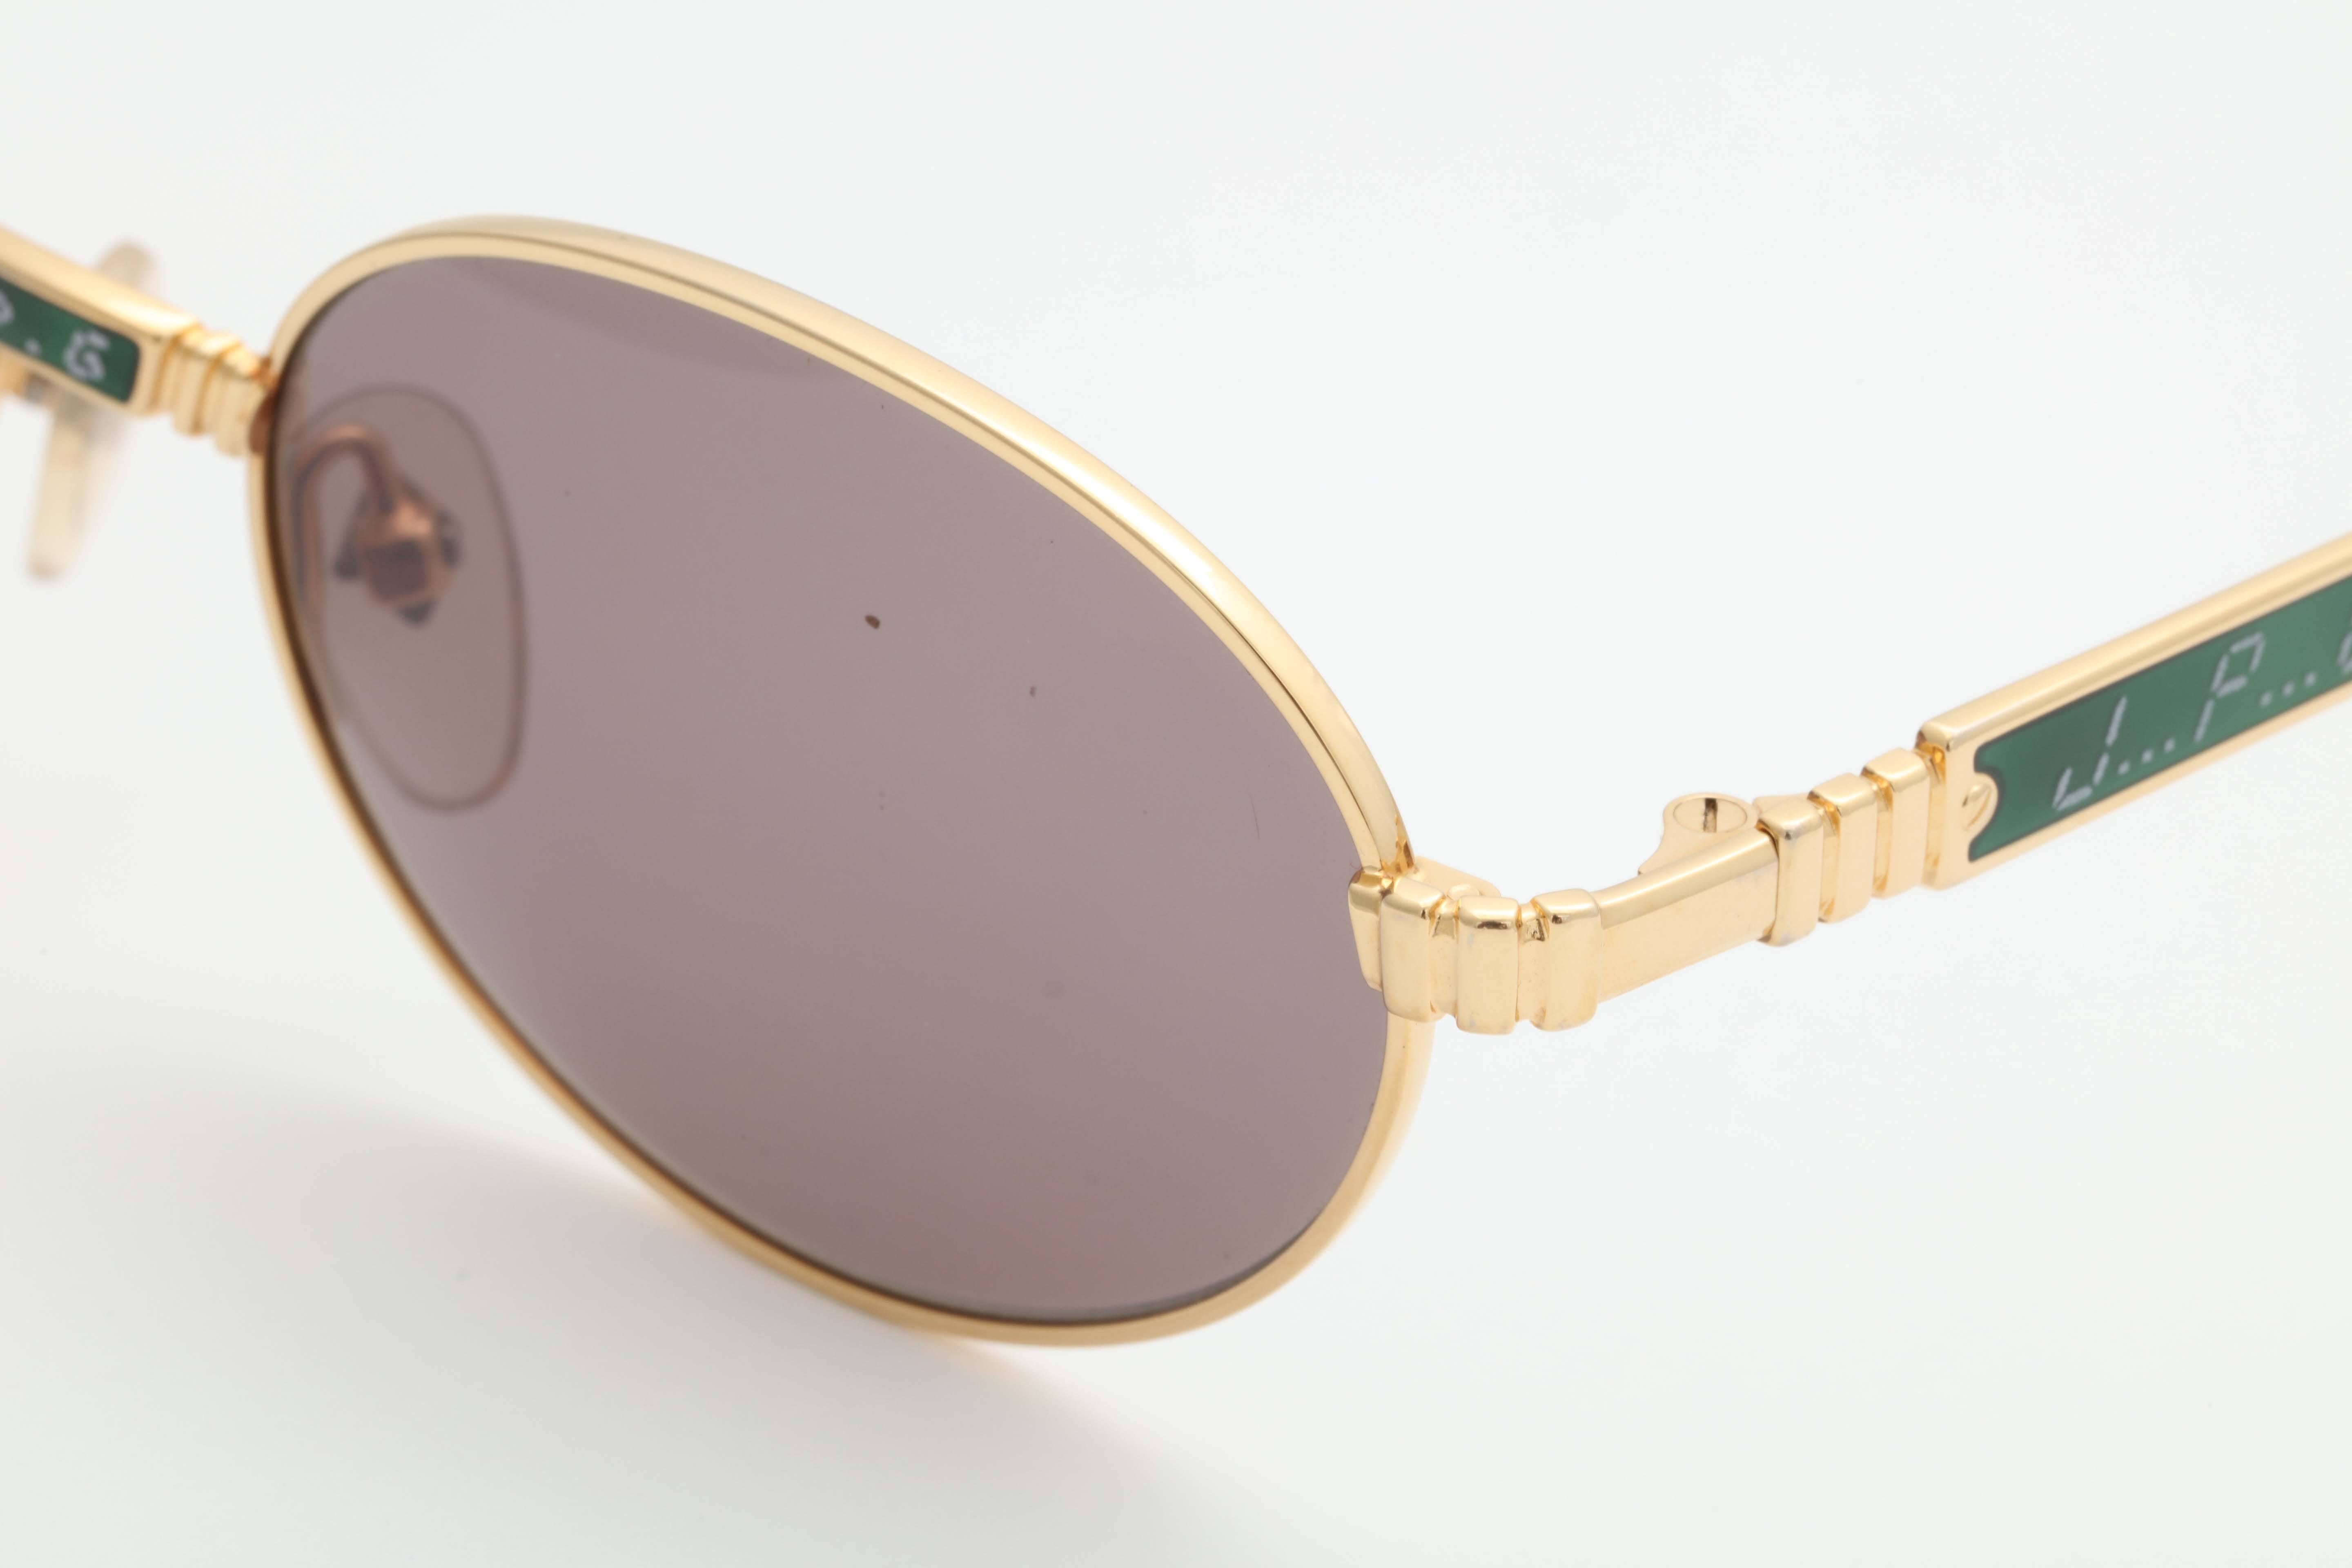 Jean Paul Gaultier Vintage 58-5104 Sunglasses  In Excellent Condition For Sale In Chicago, IL